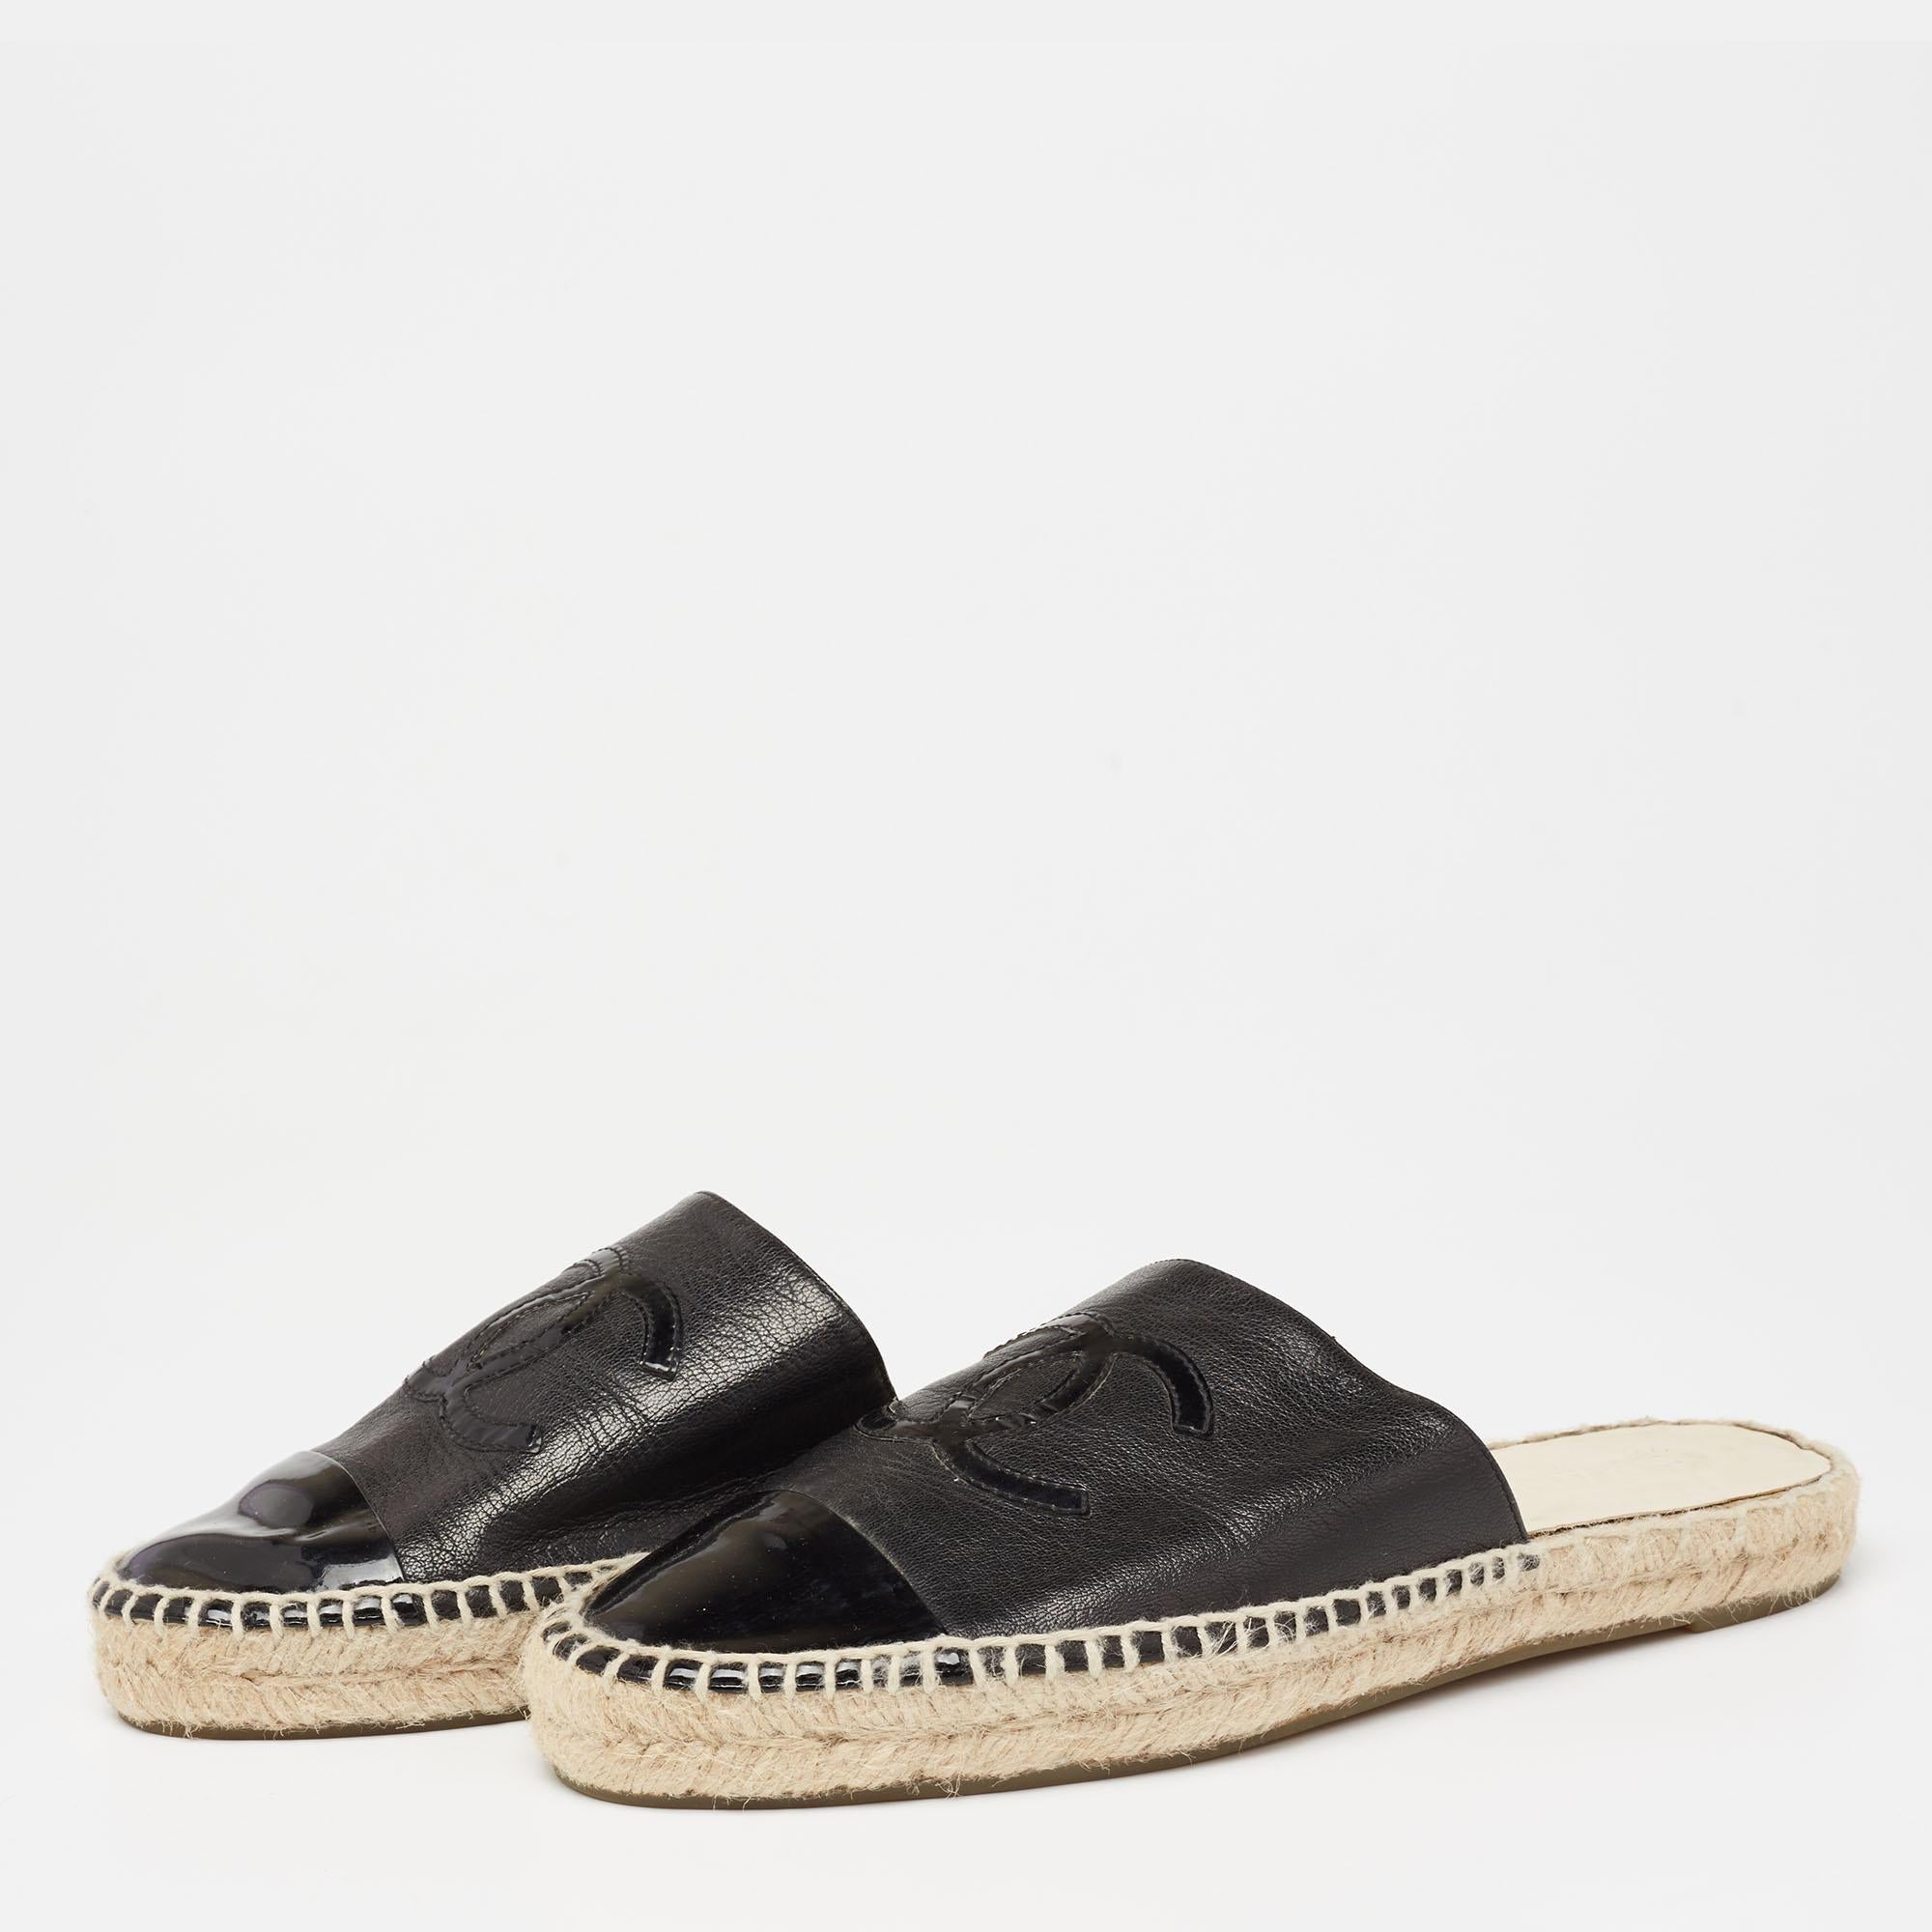 Updated with a brand motif on the front, these Chanel mules signify comfort. The pair comes created from leather and patent leather and is paired with espadrille trims, rubber soles, and a slip-on fitting.

